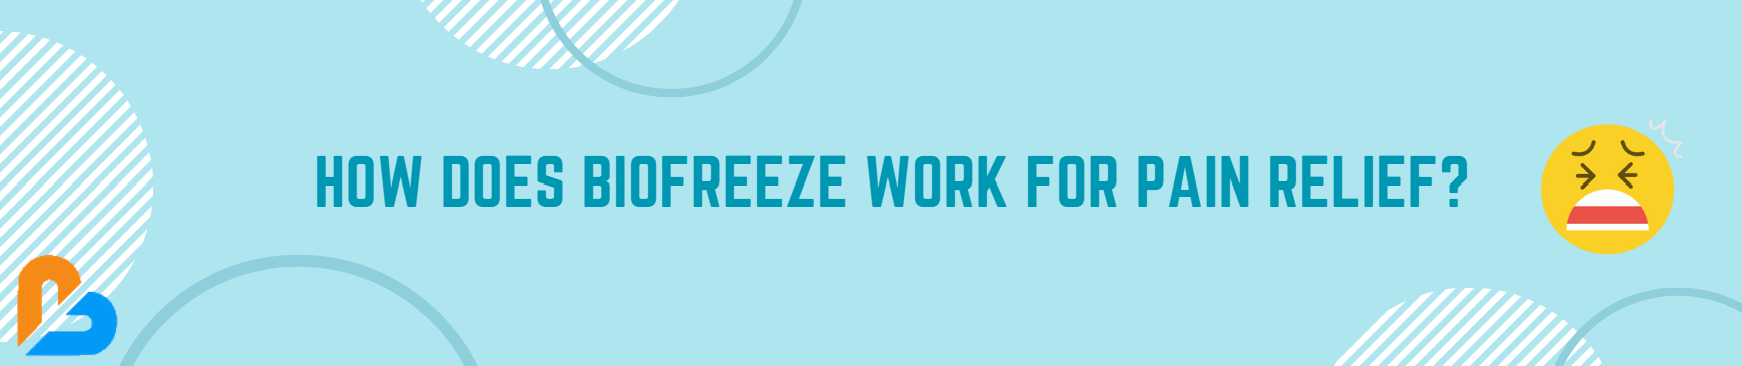 How does biofreeze work for pain relief